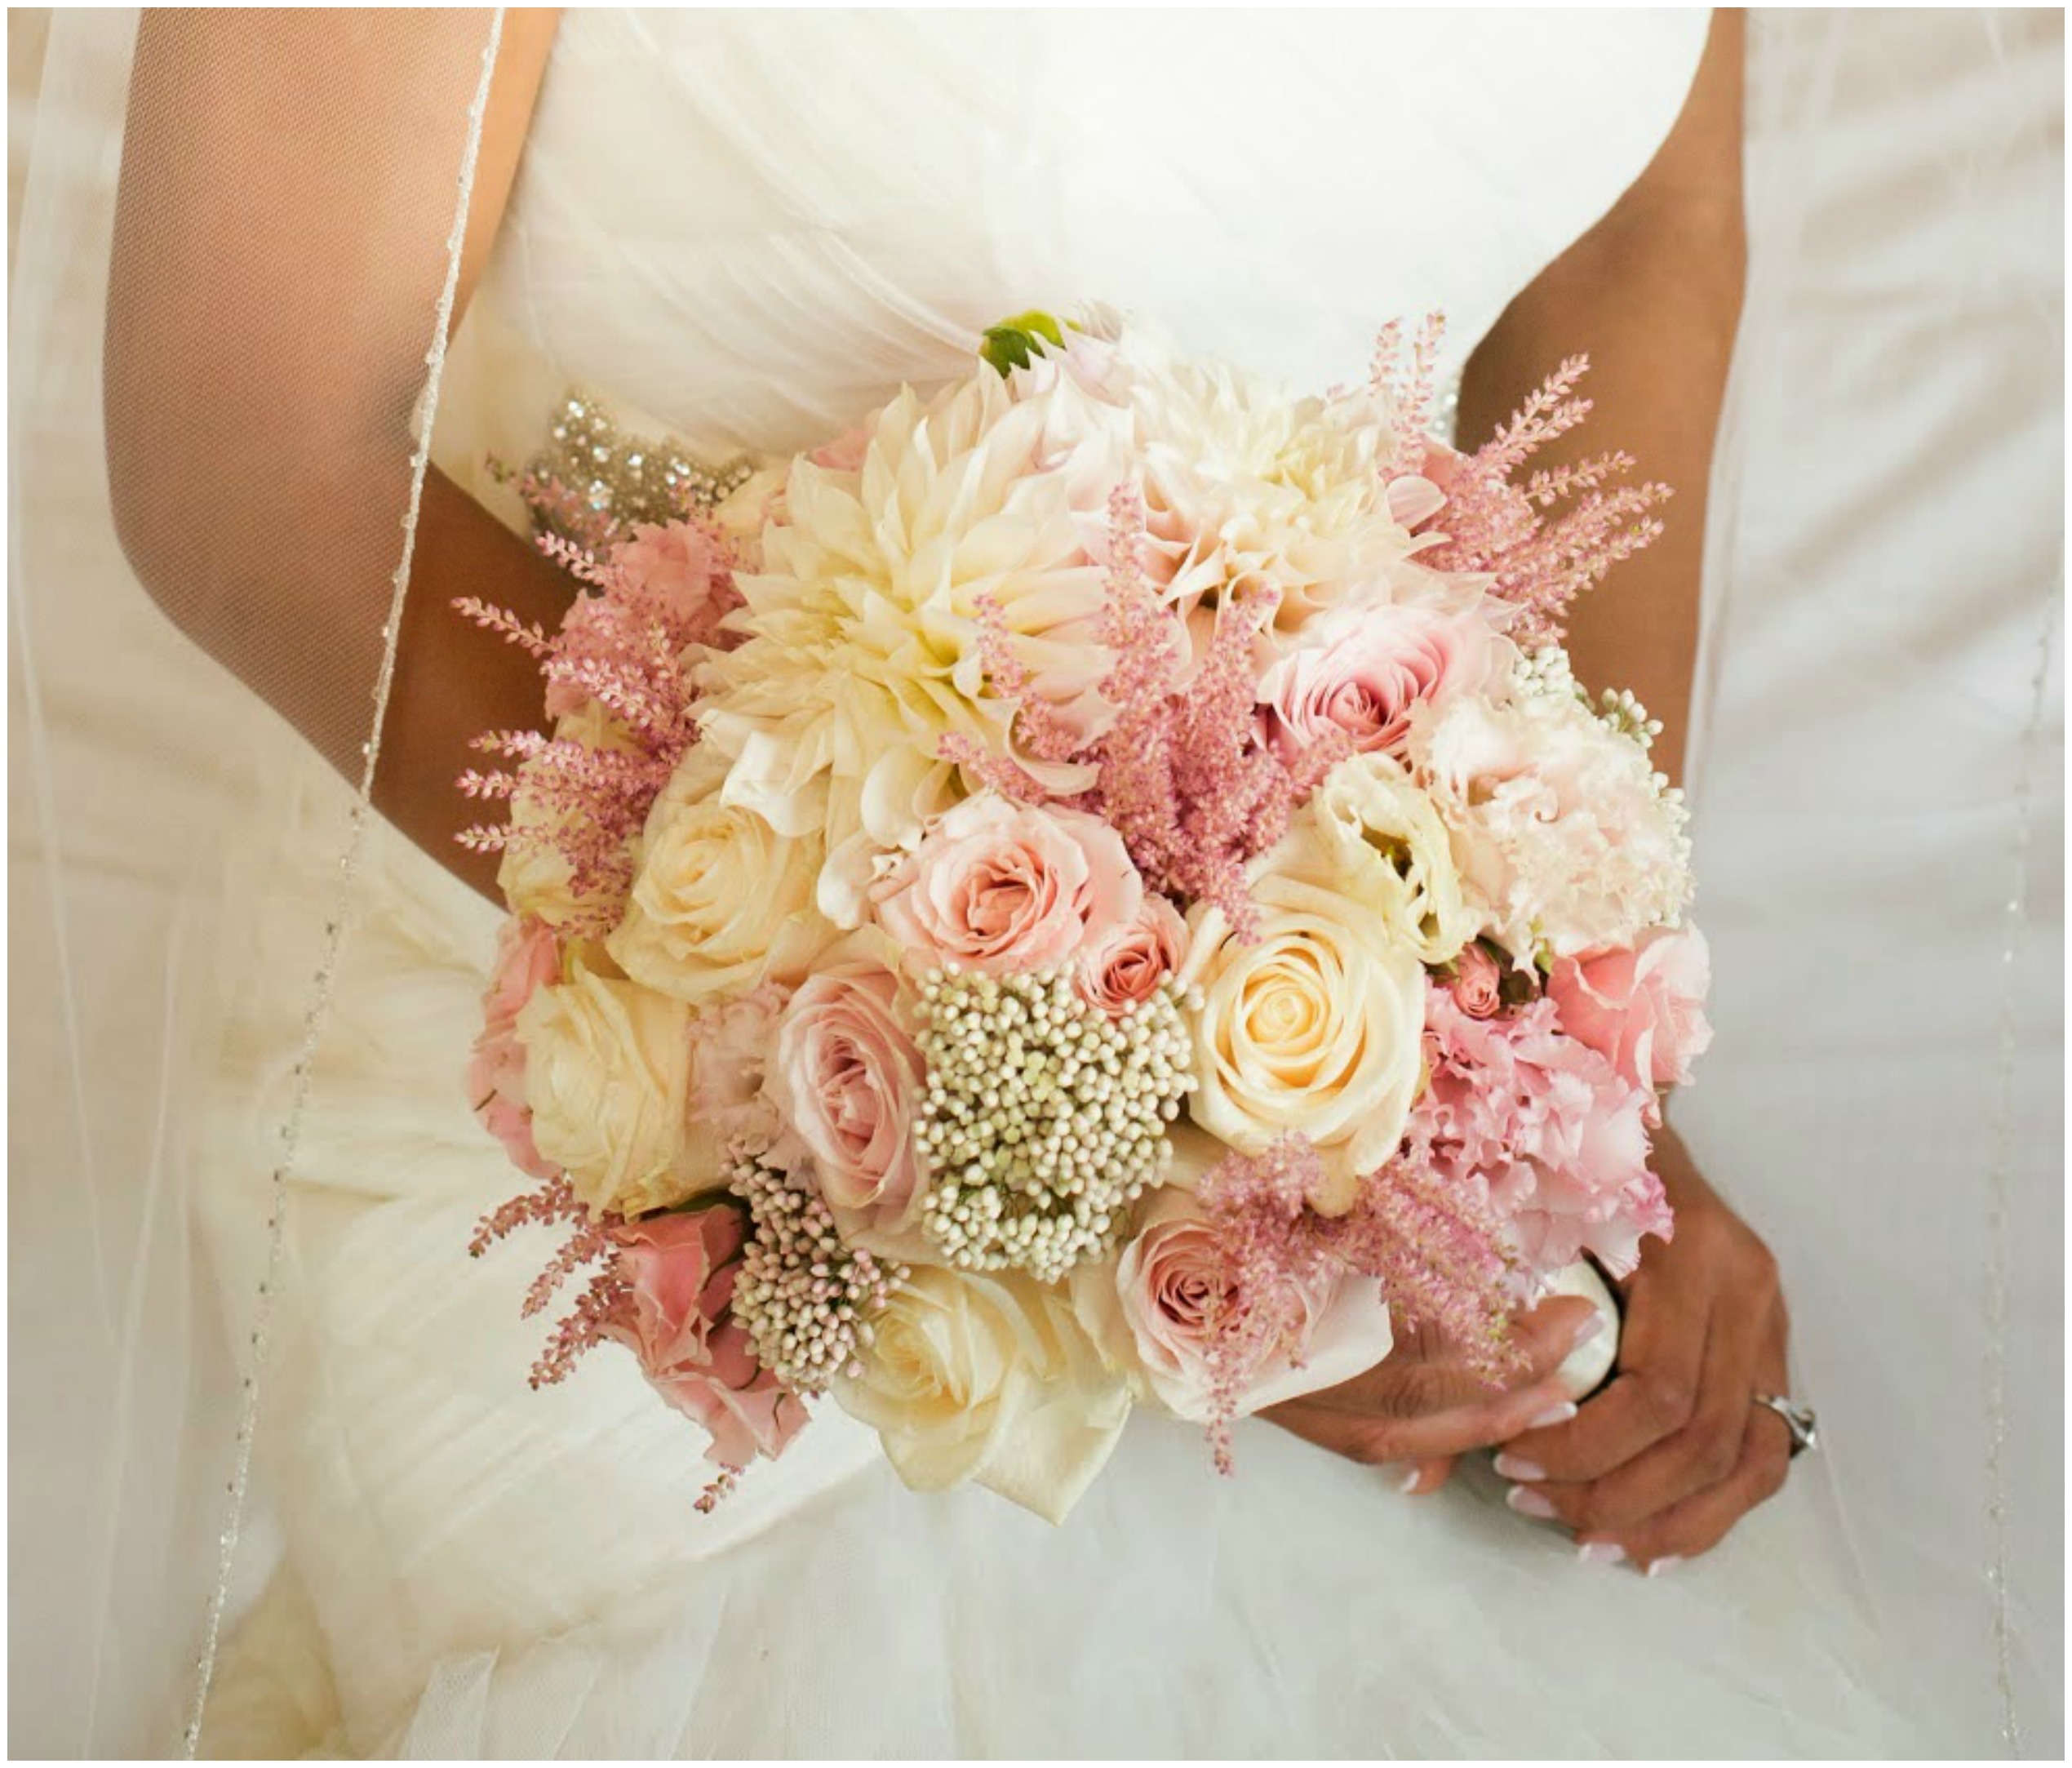 Soft pink & cream bridal bouquet of roses and astilbe